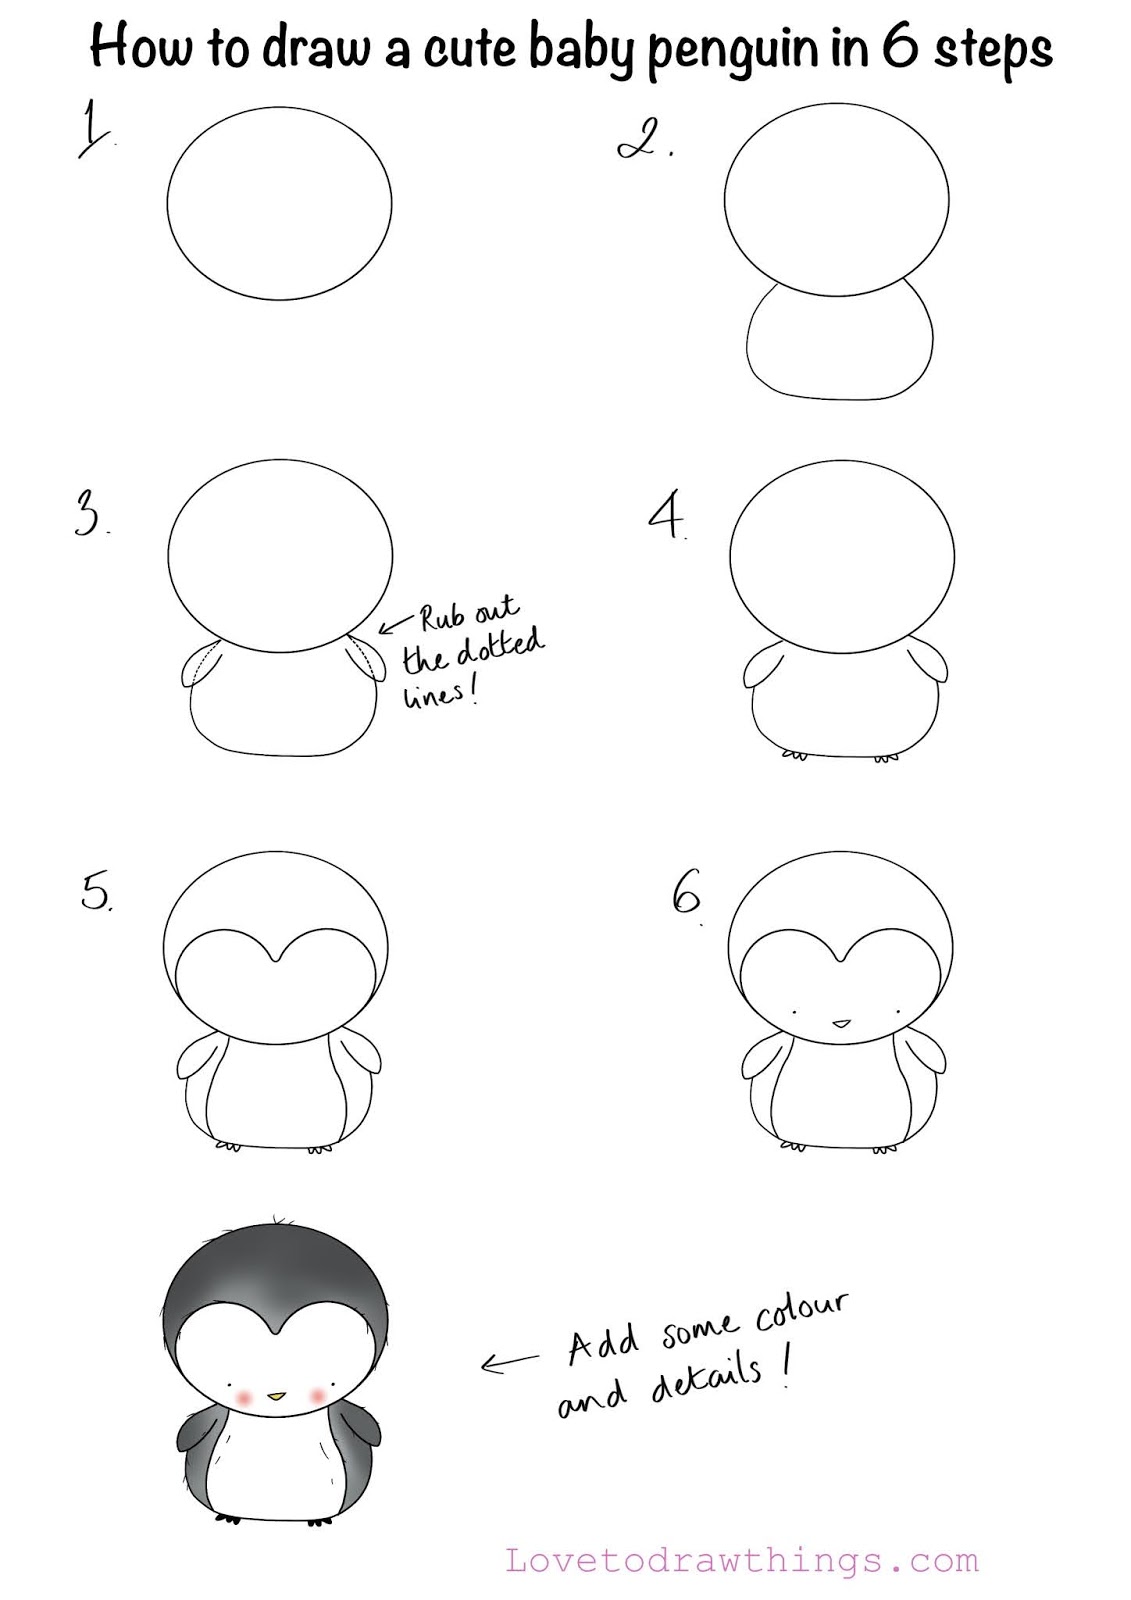 How To Draw A Baby Penguin Step By Step - pic-fart